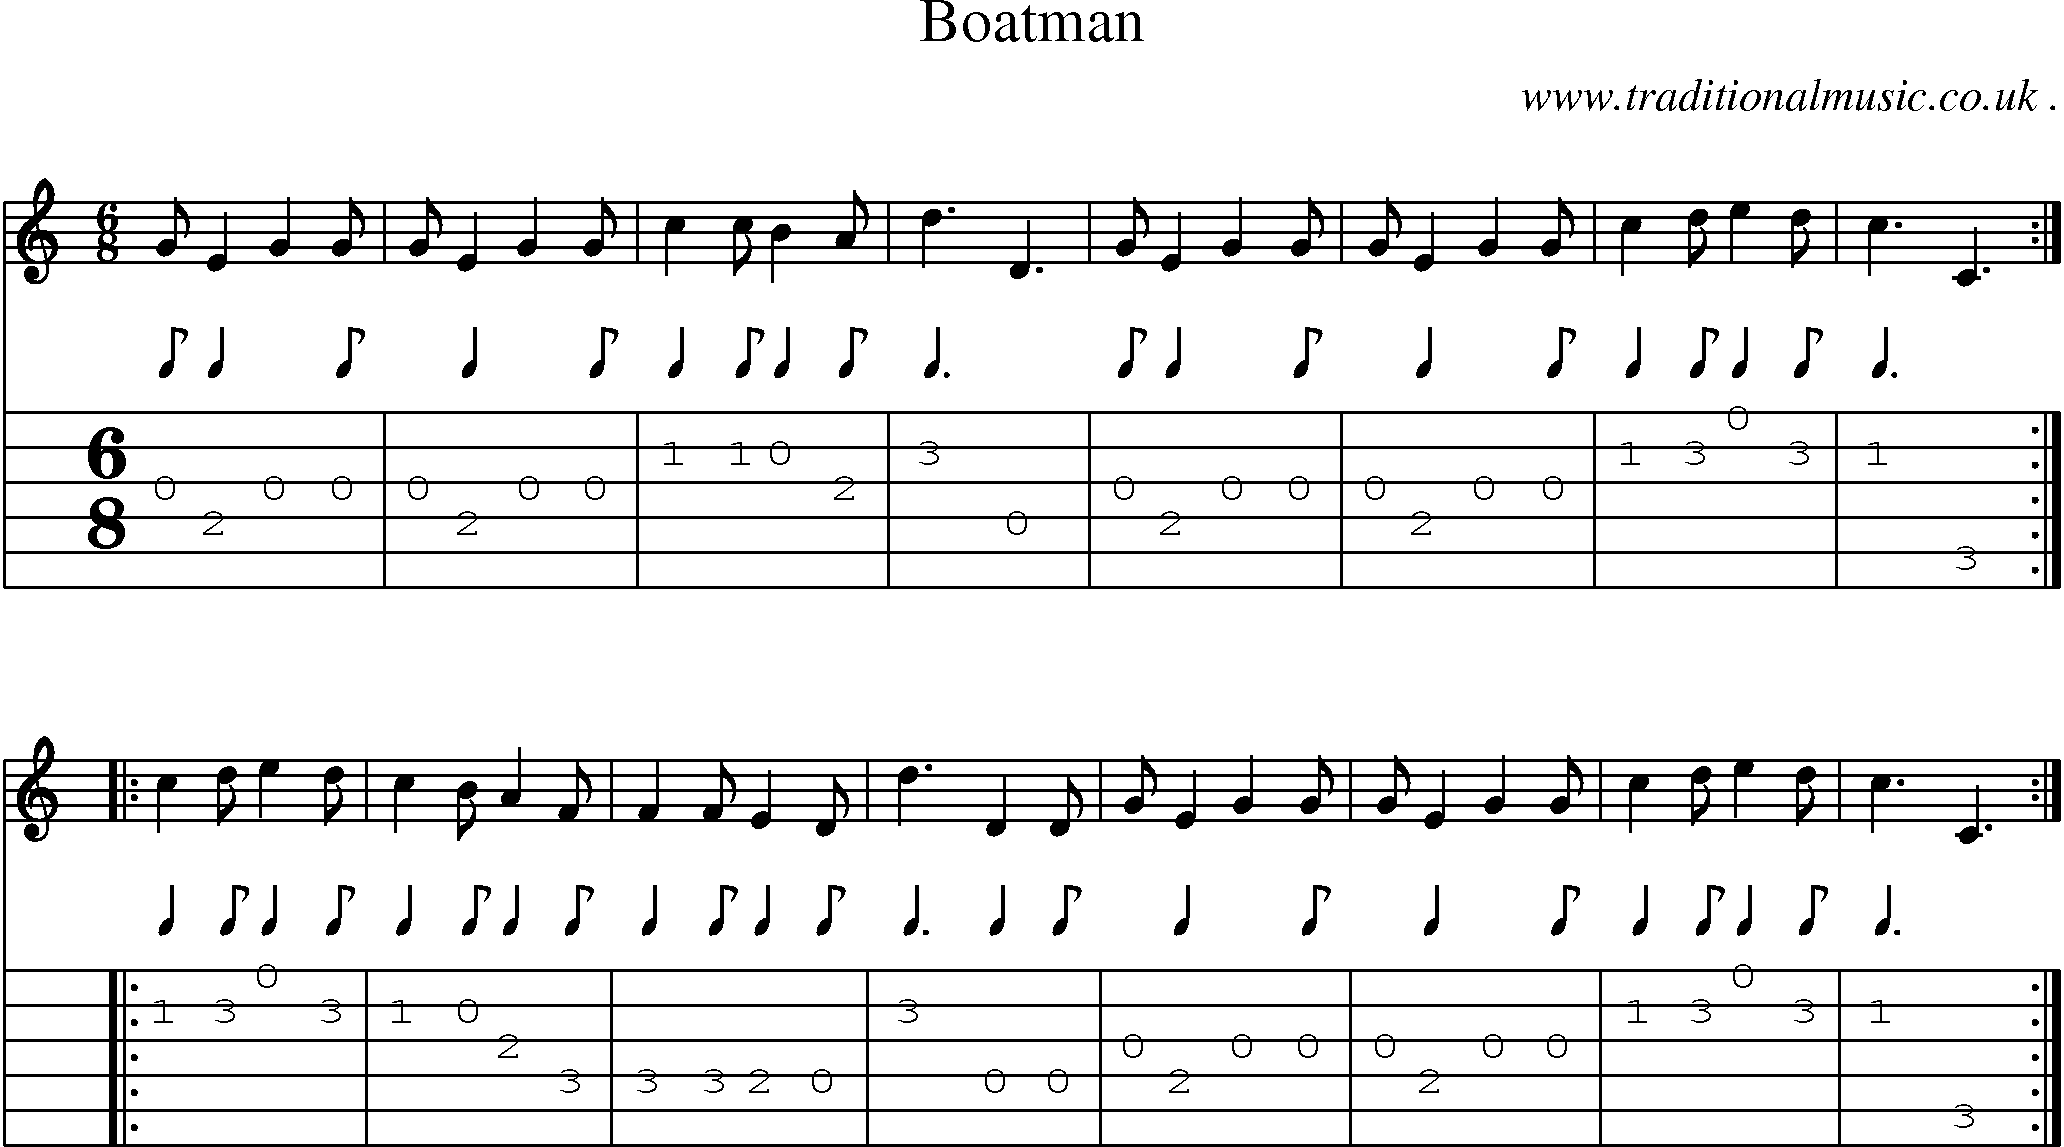 Sheet-Music and Guitar Tabs for Boatman